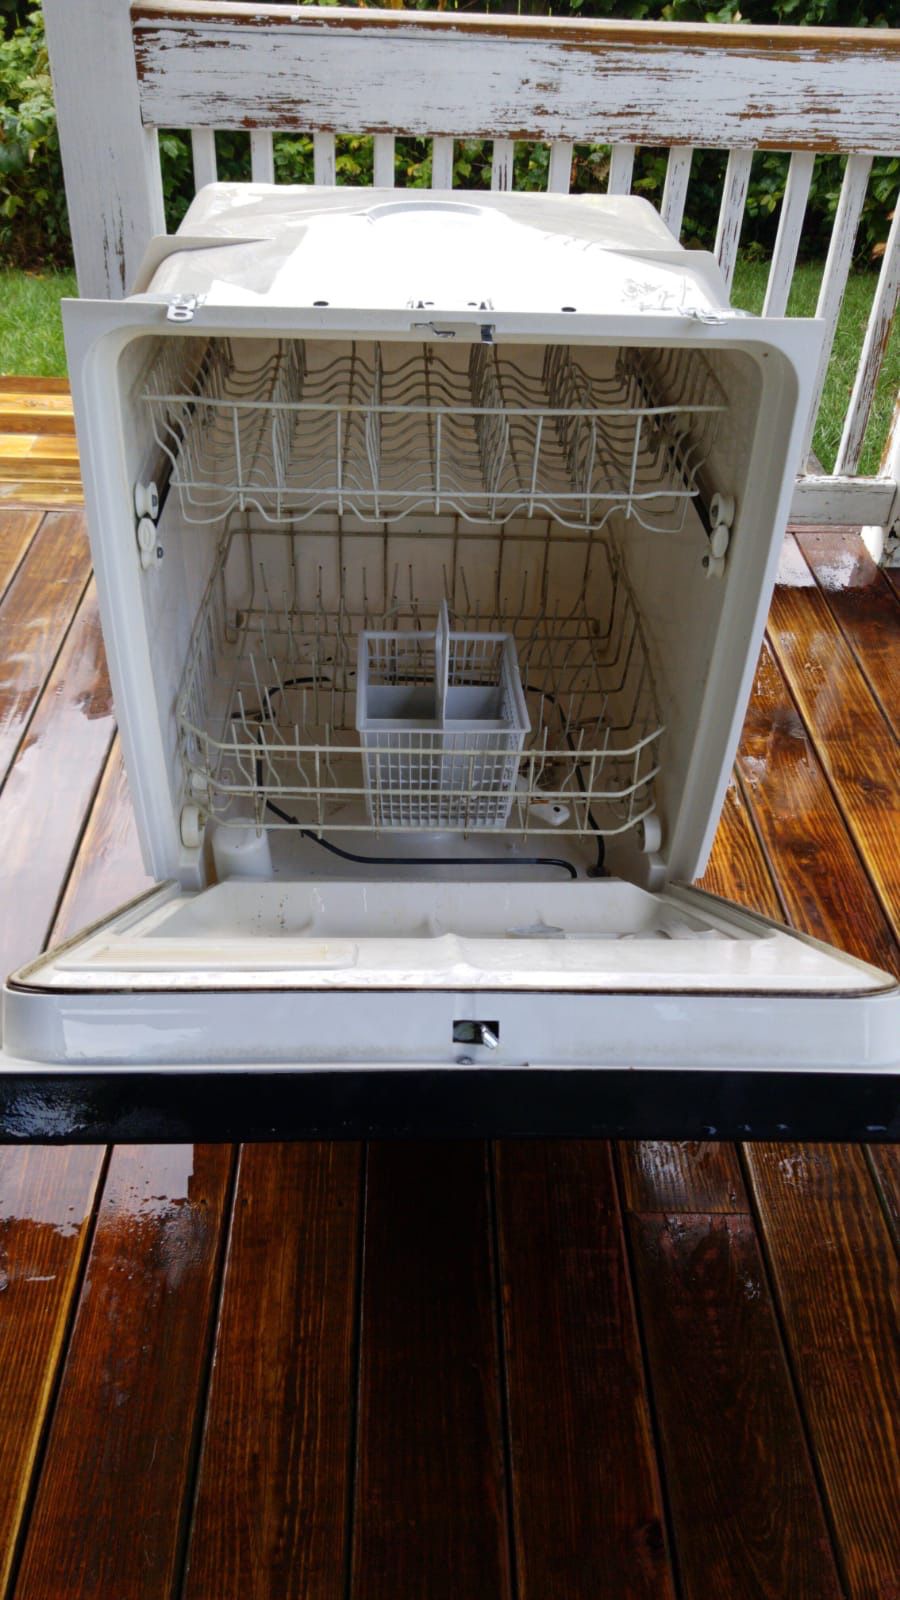 GE dishwasher in very good condition!